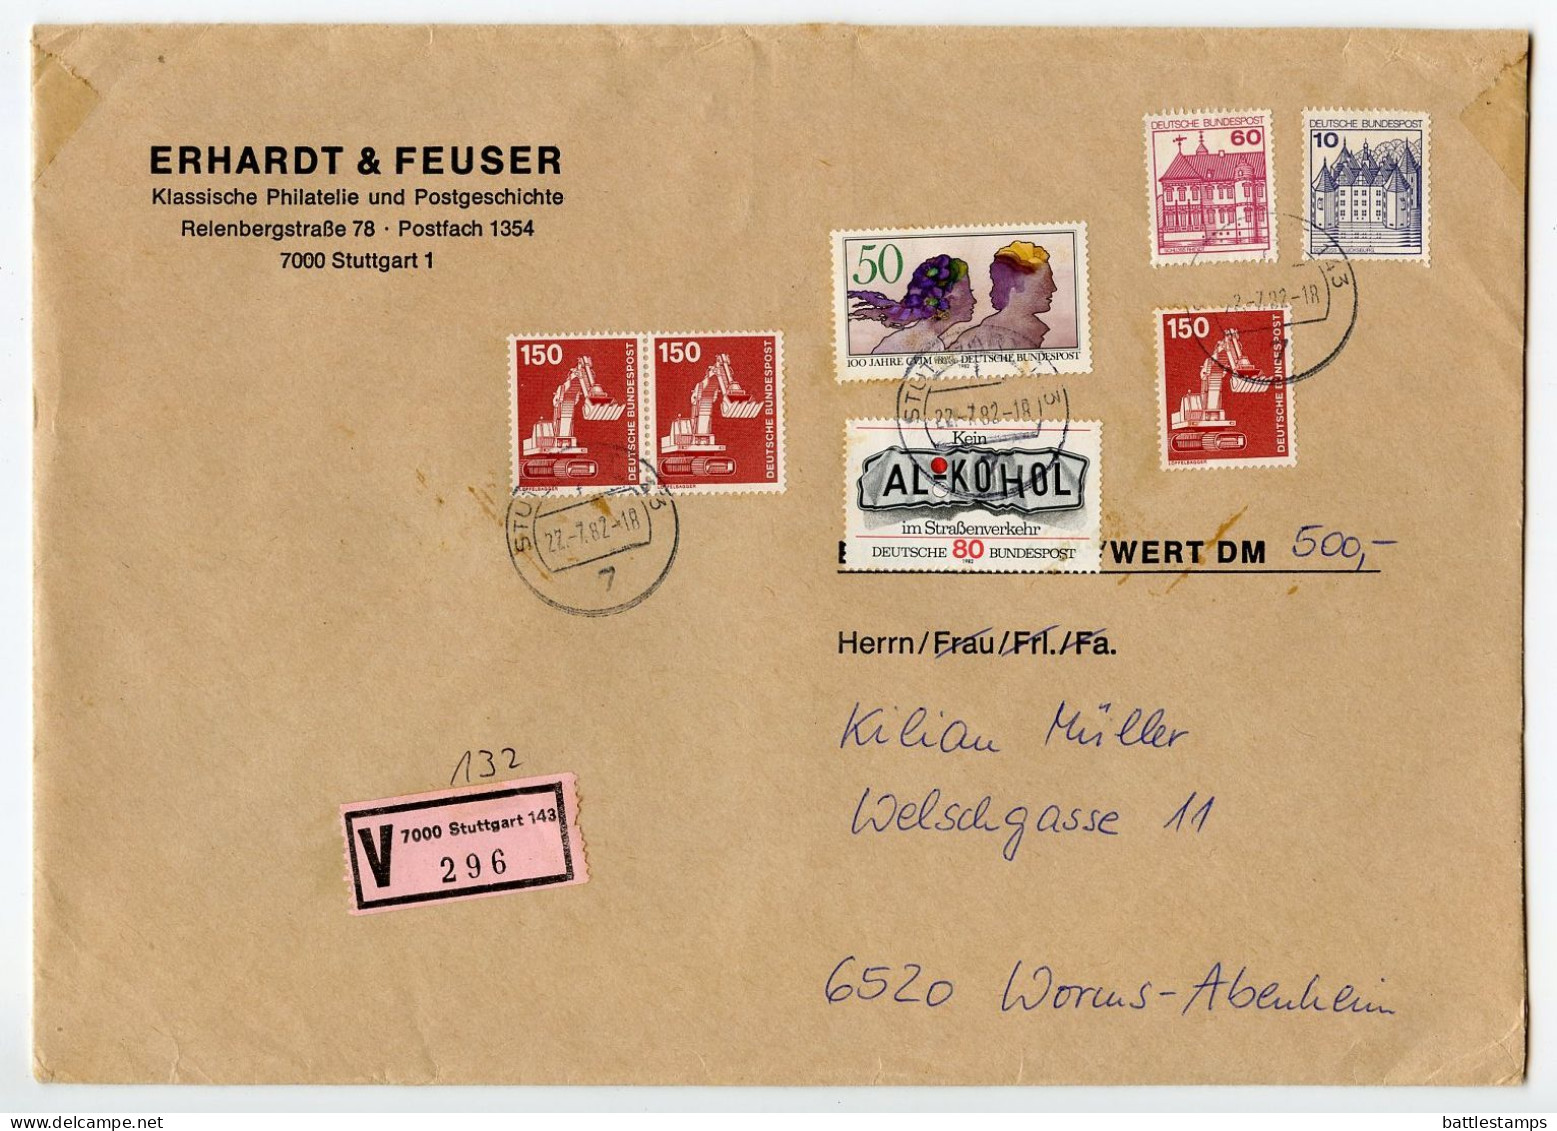 Germany, West 1982 Insured V-Label Cover; Stuttgart To Worms-Abenheim; Mix Of Stamps - Briefe U. Dokumente